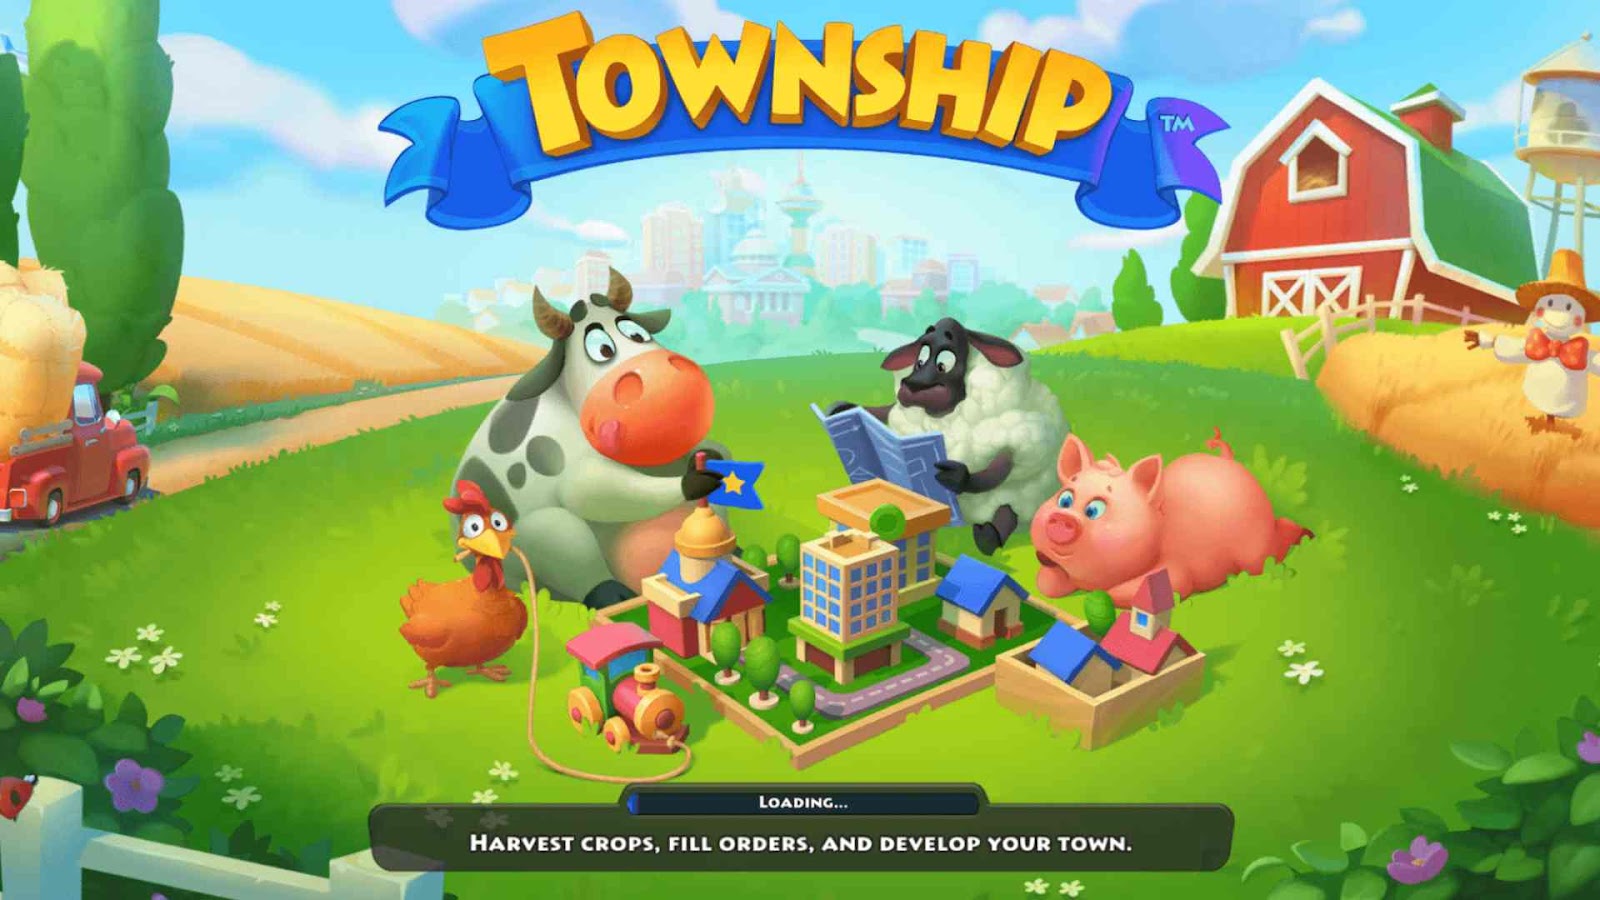 Township on PC